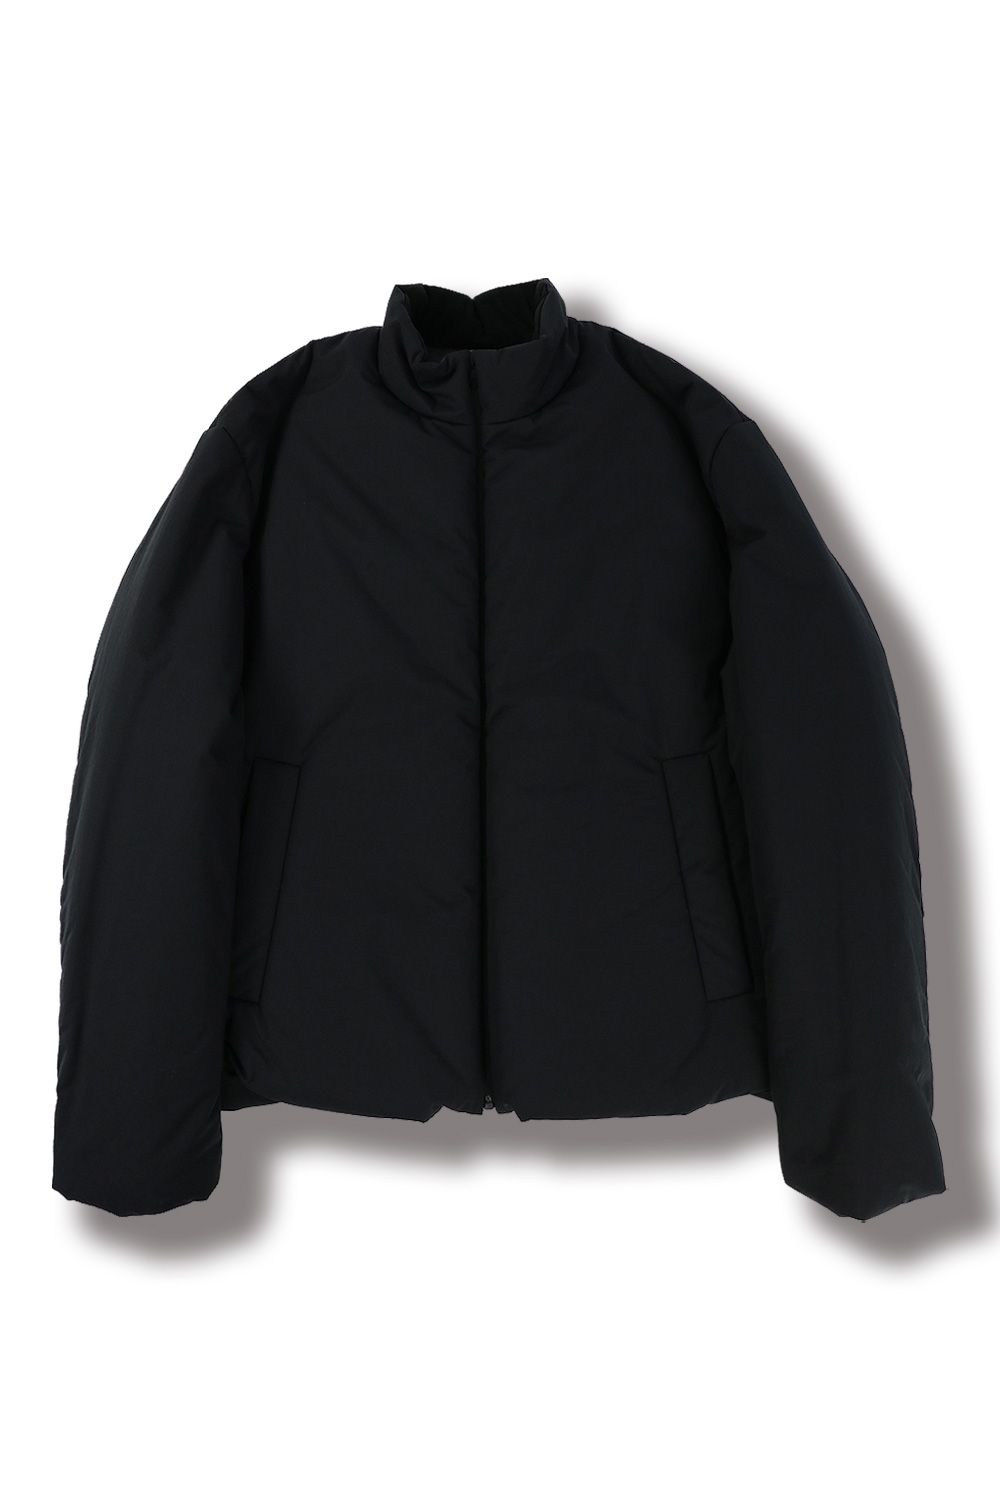 WEWILL - 【23AW】SOLID PUFFER JACKET(BLACK) | Acacia ONLINESTORE